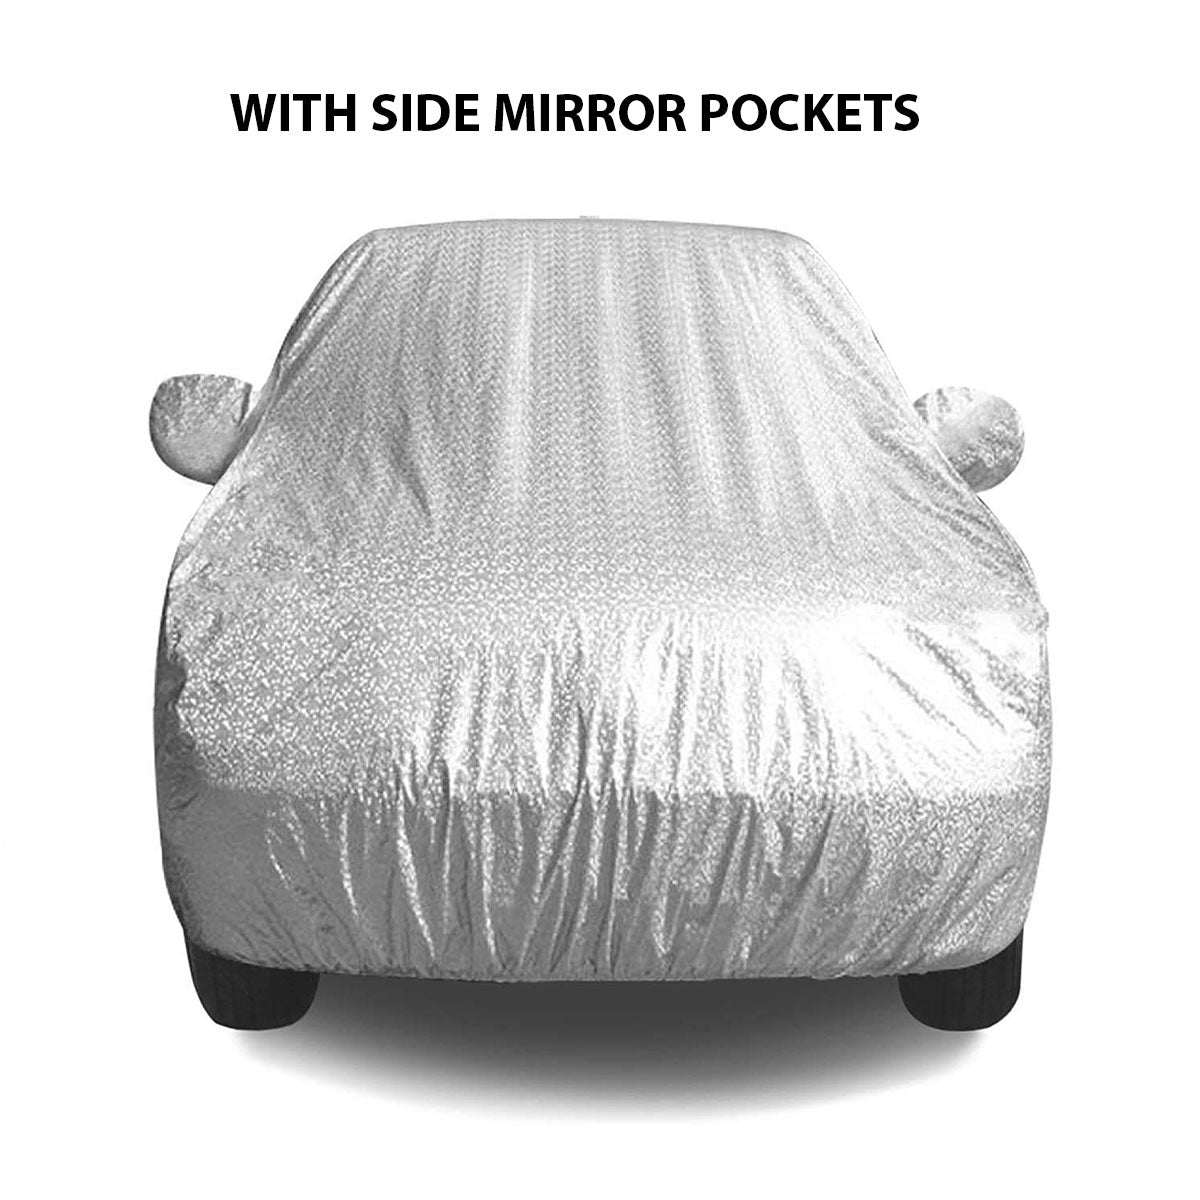 Oshotto Spyro Silver Anti Reflective, dustProof Silver and Water Proof Silver Car Body Cover with Mirror Pockets For BMW X5 (2015-2019)